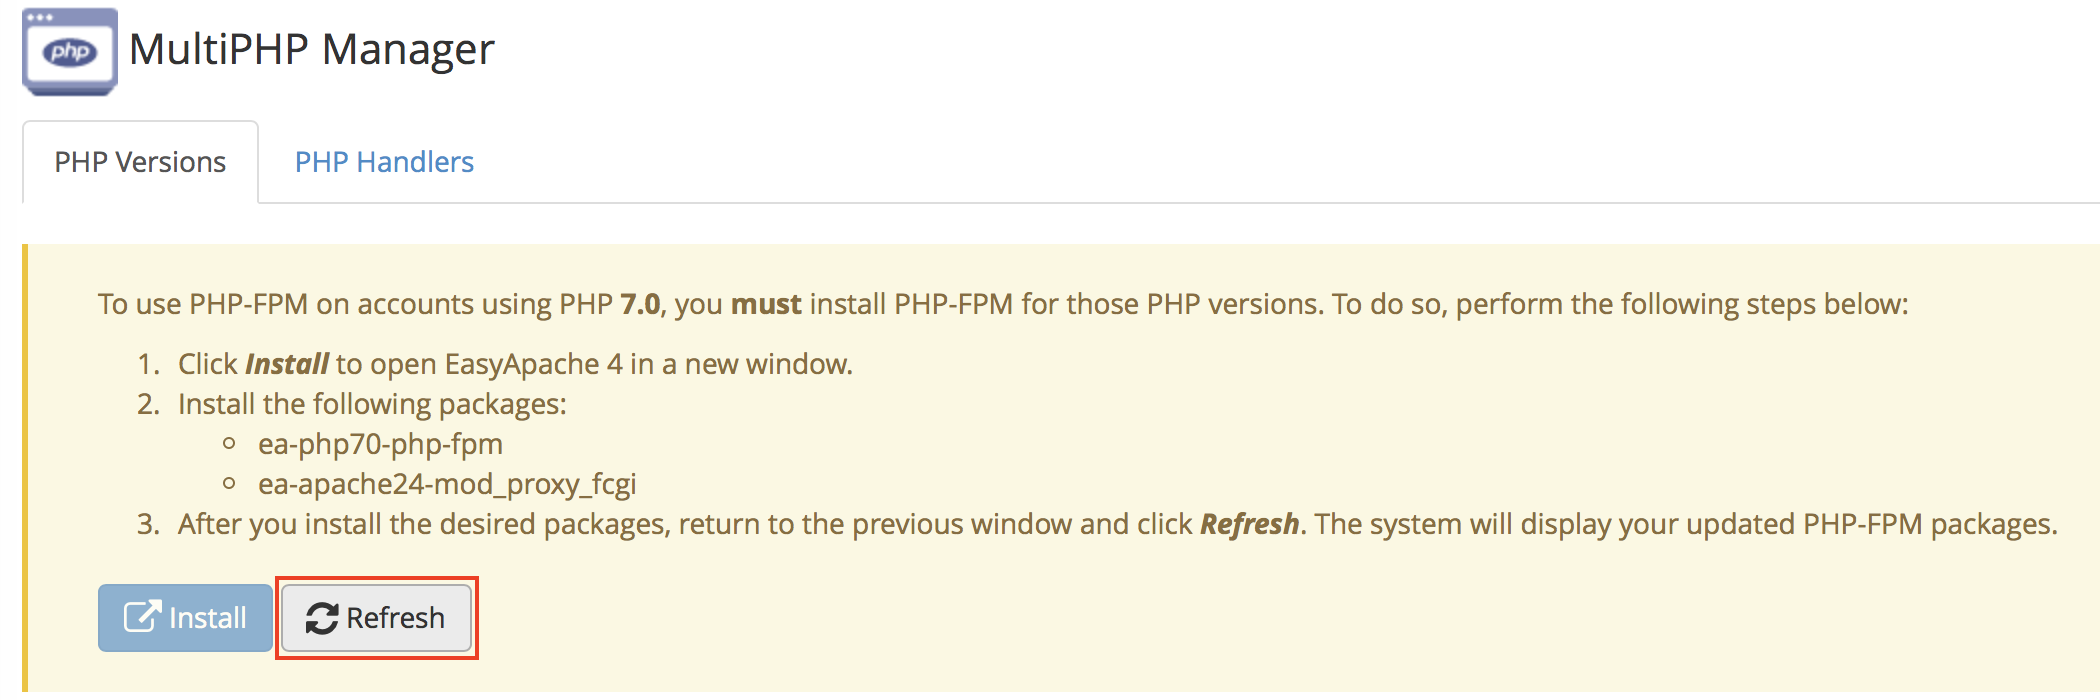 WHM MultiPHP Manager PHP-FPM message Refresh button.